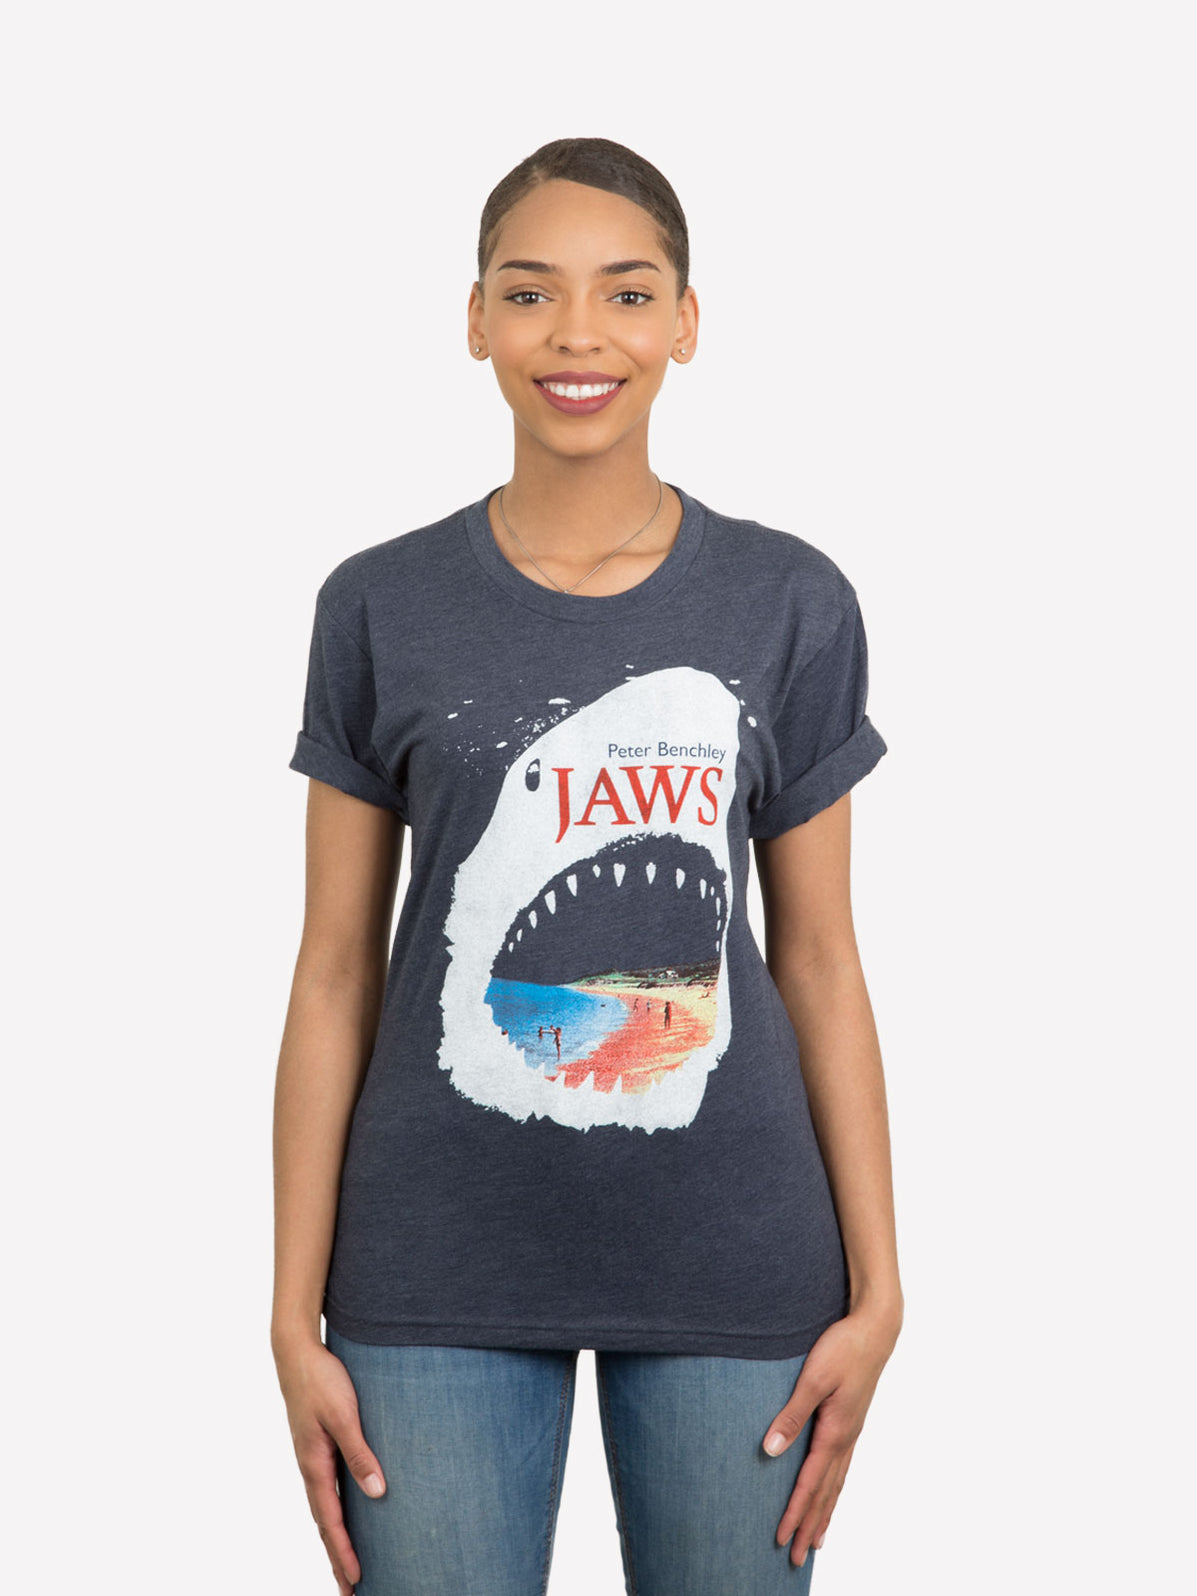 Jaws unisex book t-shirt — Out of Print